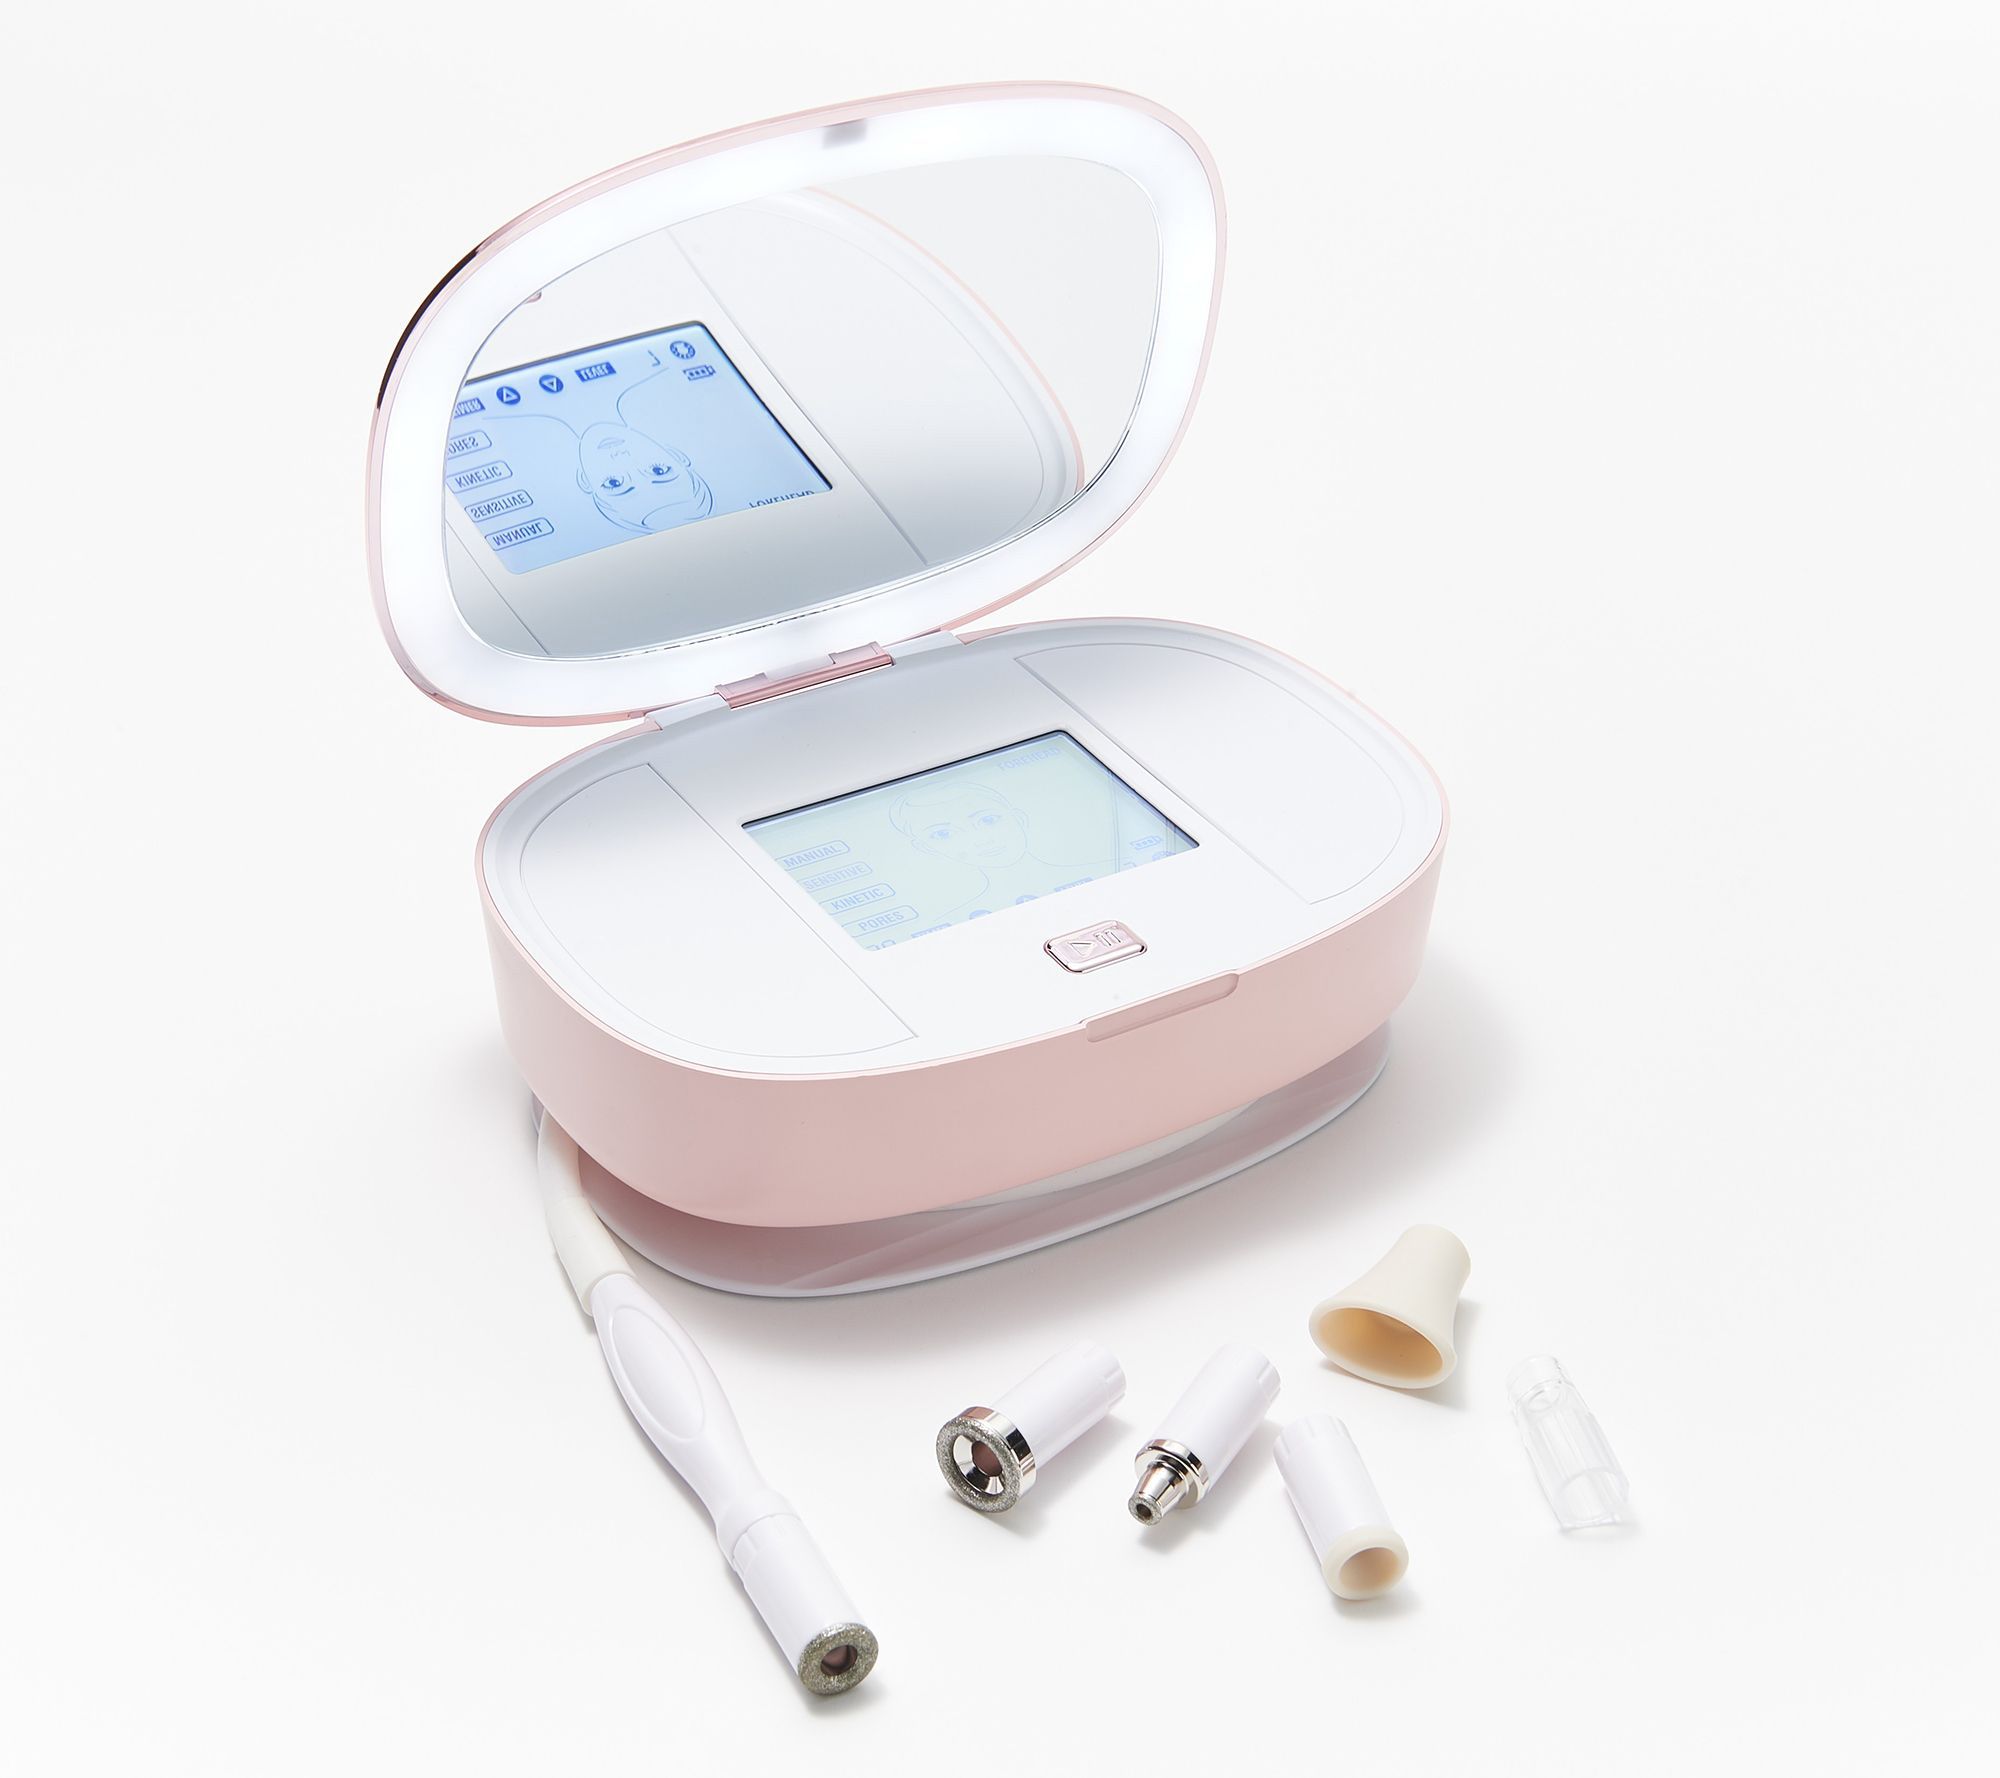 Trophy Skin Ultraderm MD - 3 in 1 Microdermabrasion System, Pore Extraction  